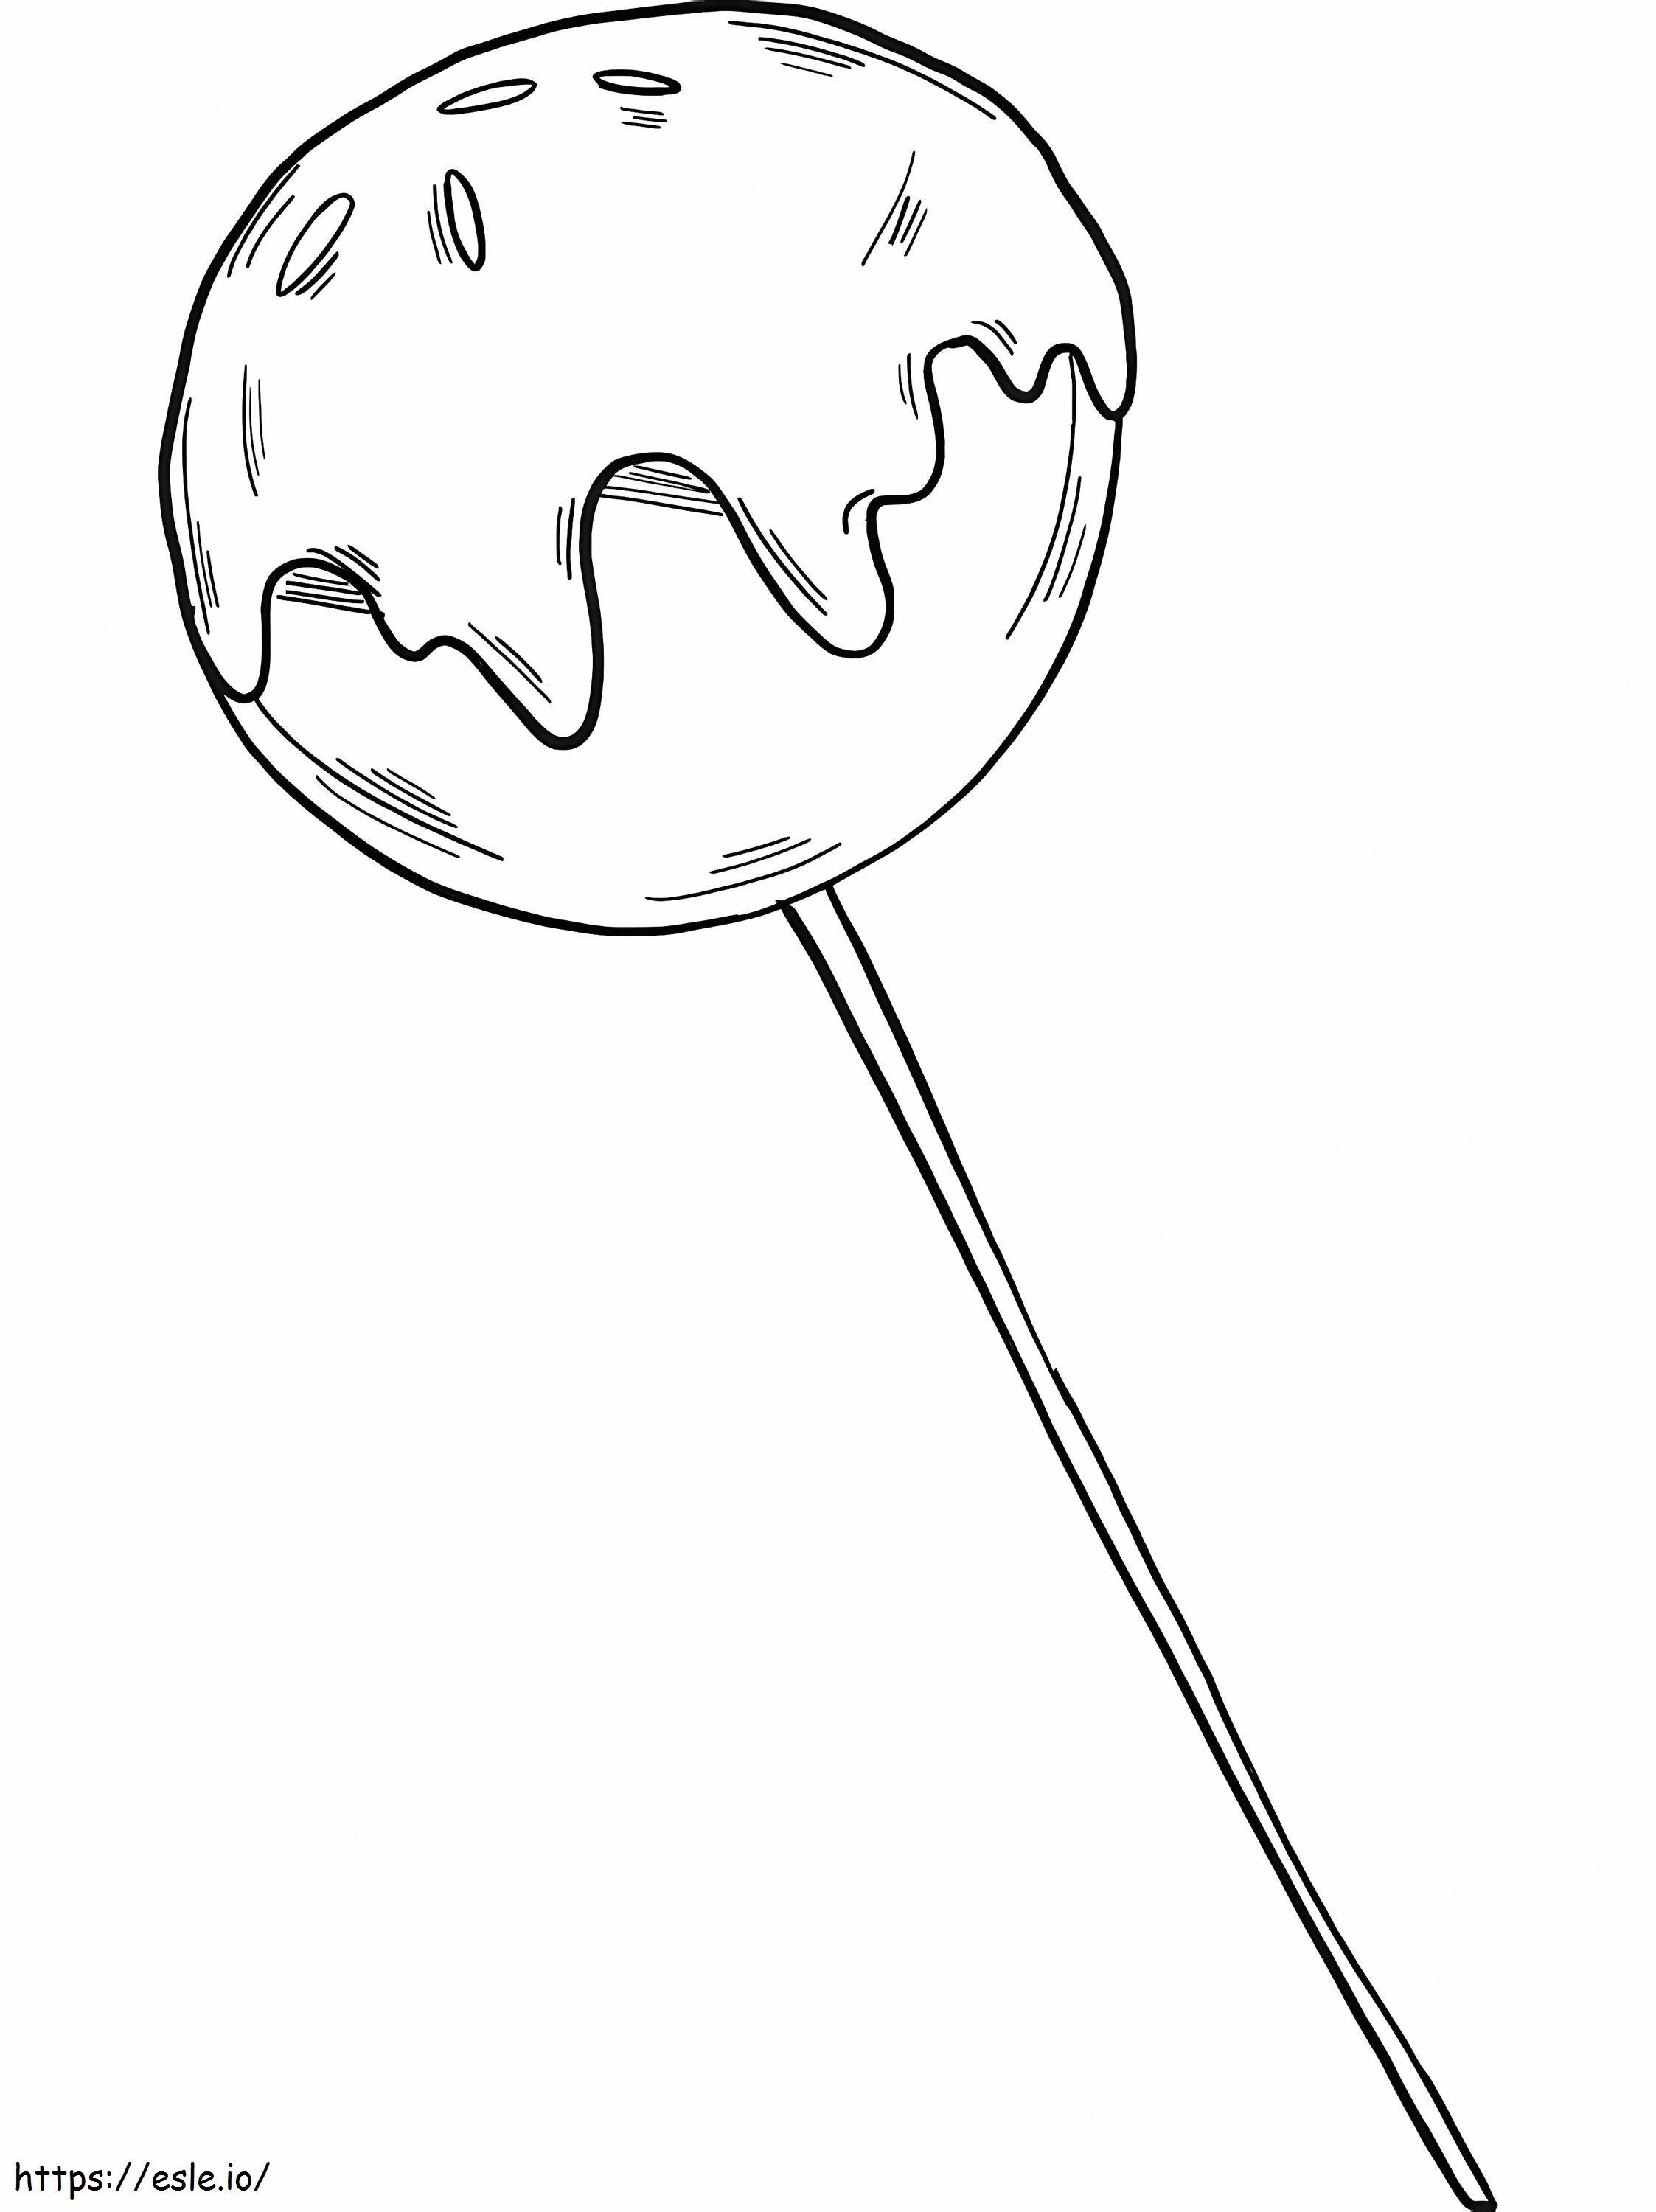 Lollipop Candy coloring page